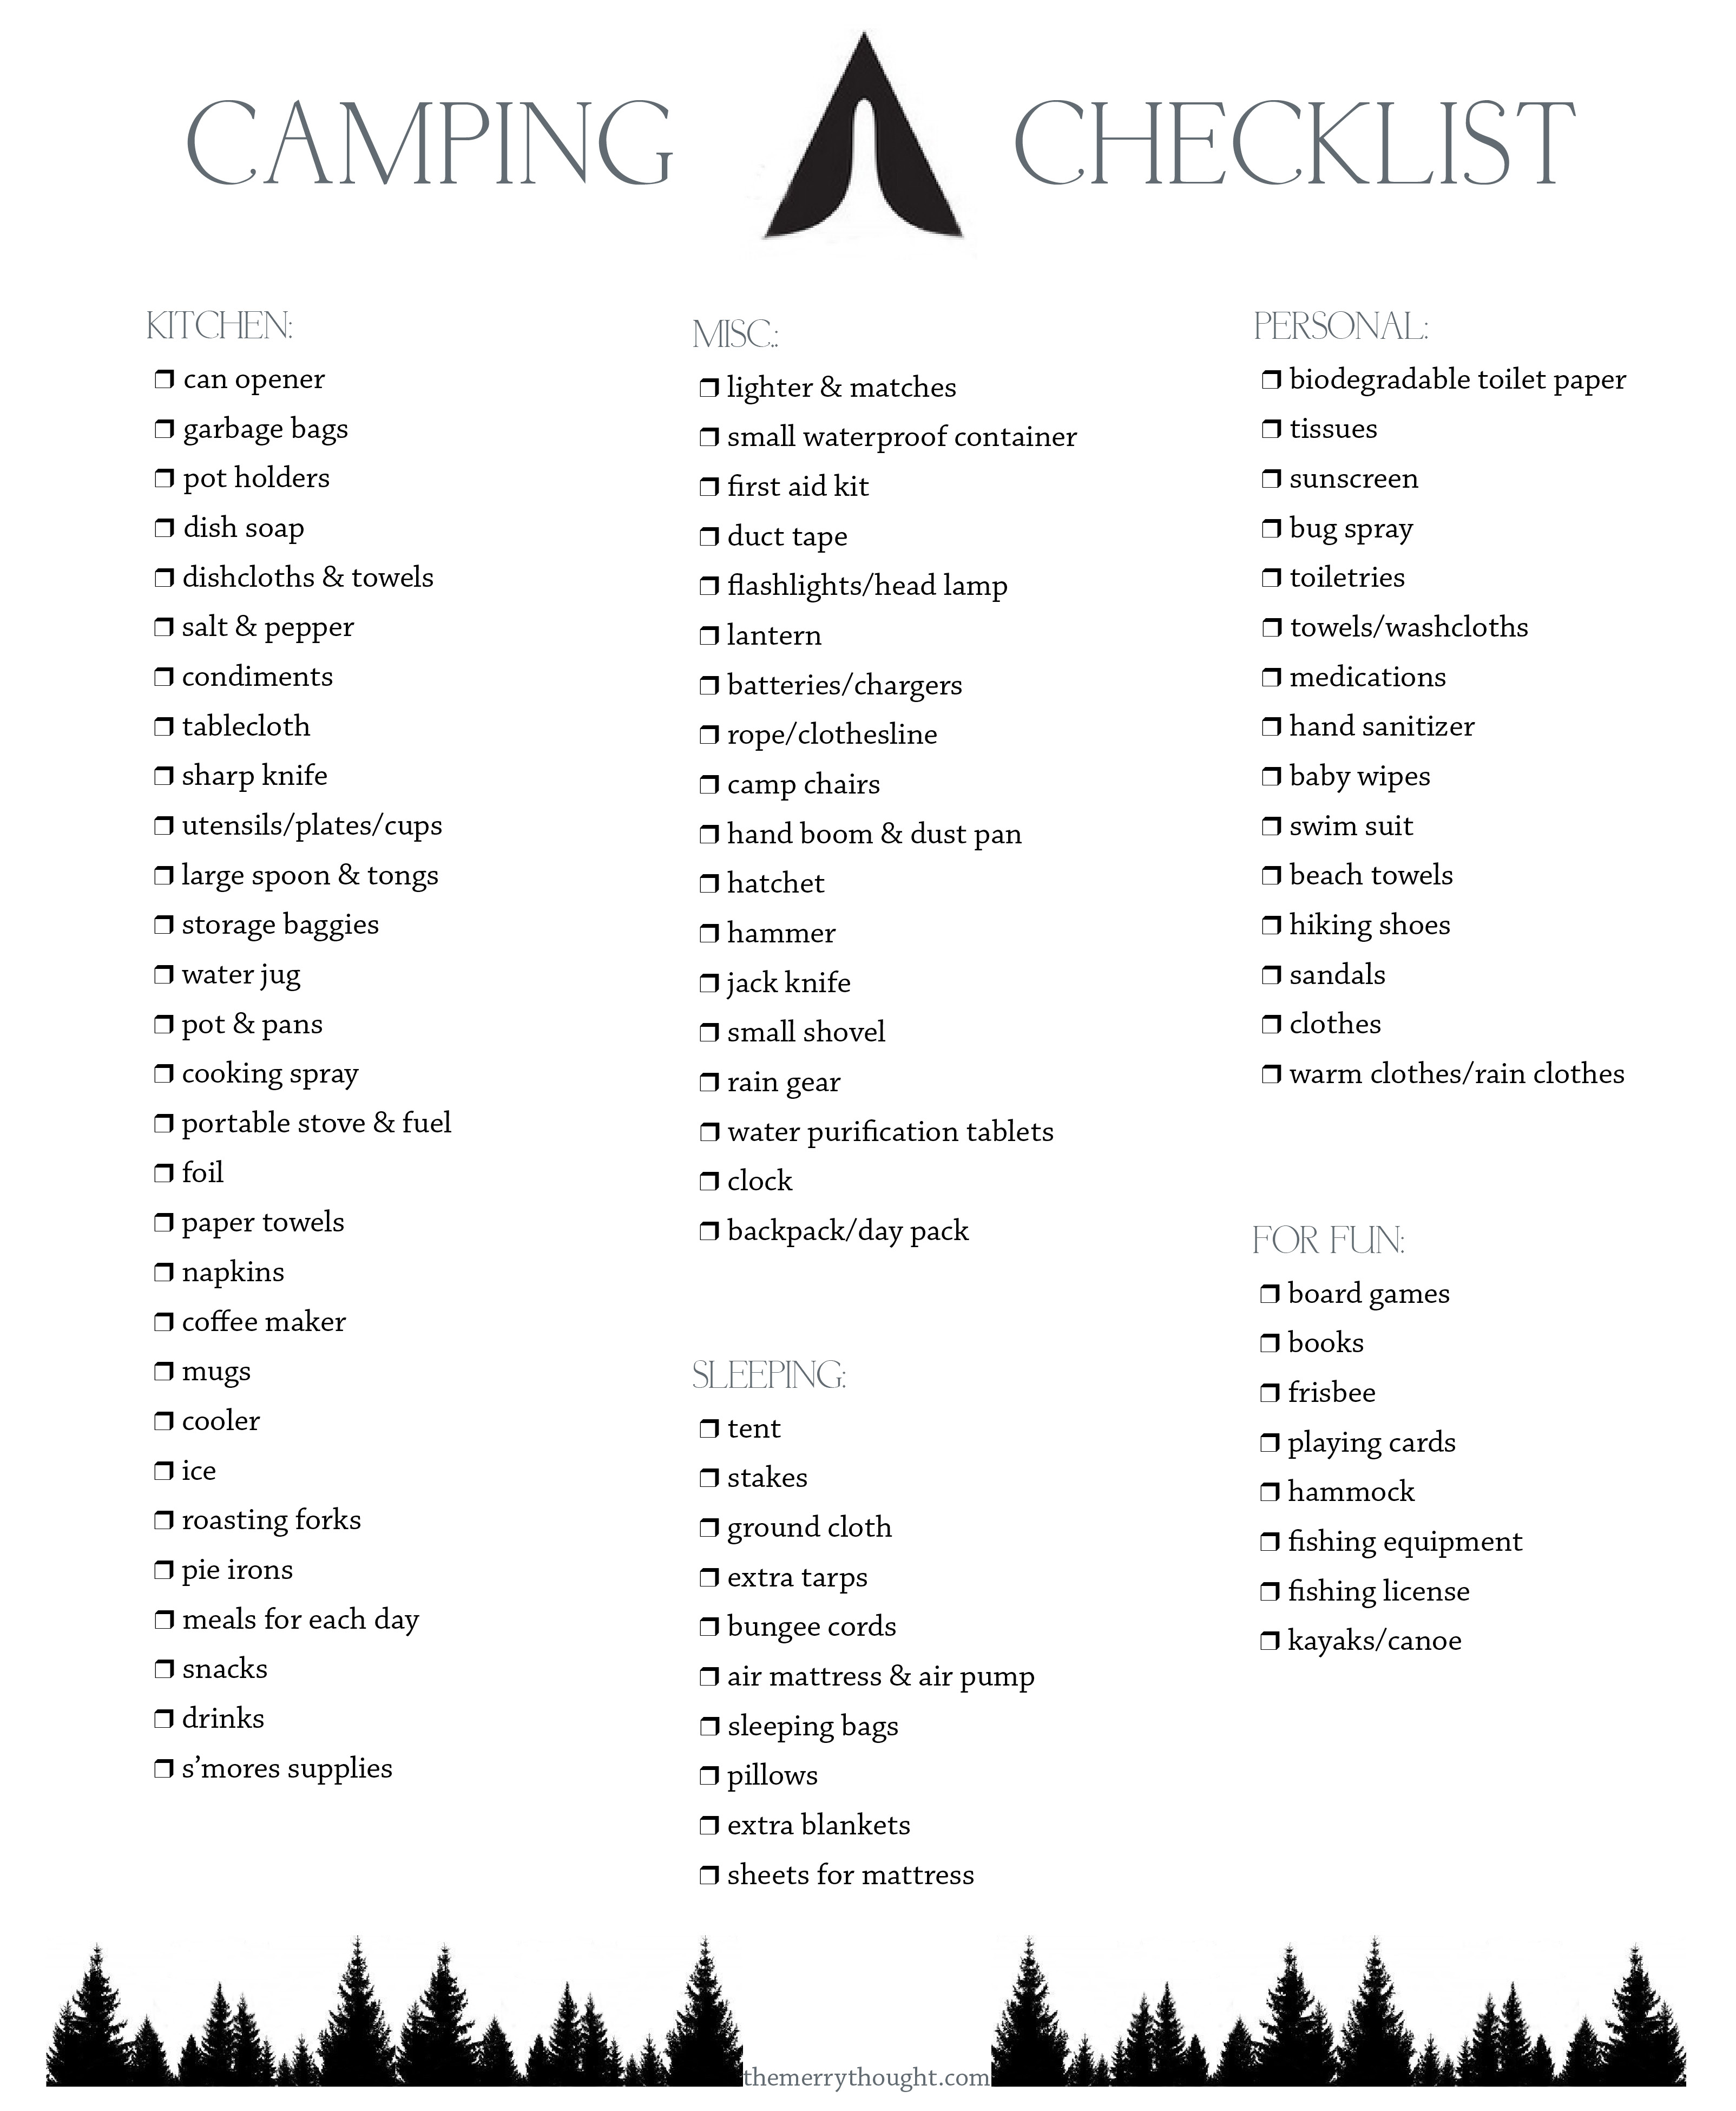 camping-checklist-the-merrythought